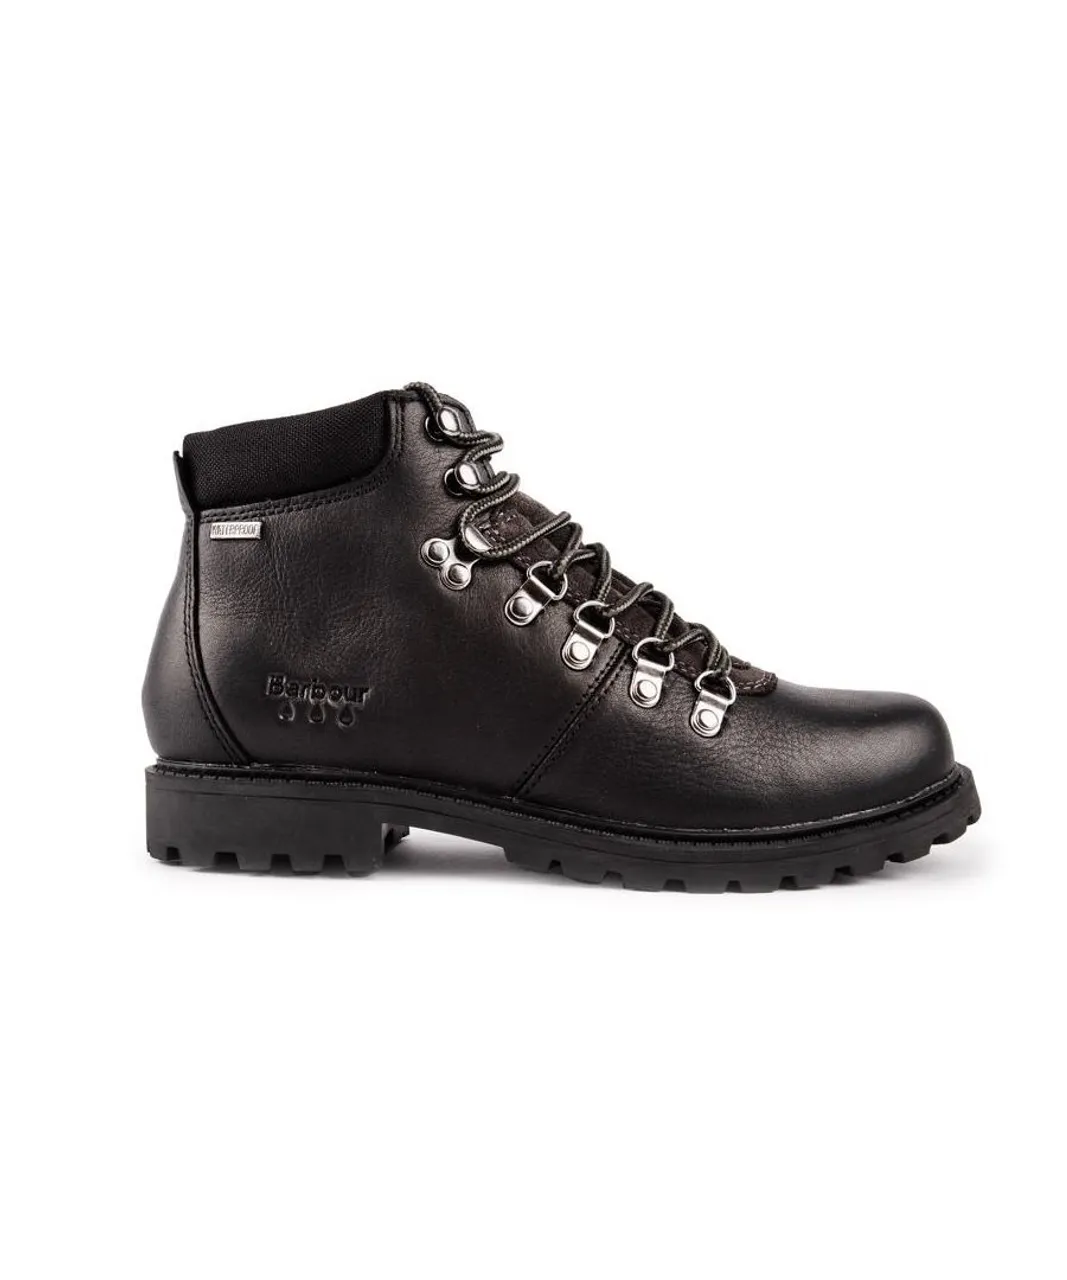 Barbour Womens Fairfield Boots - Black Leather